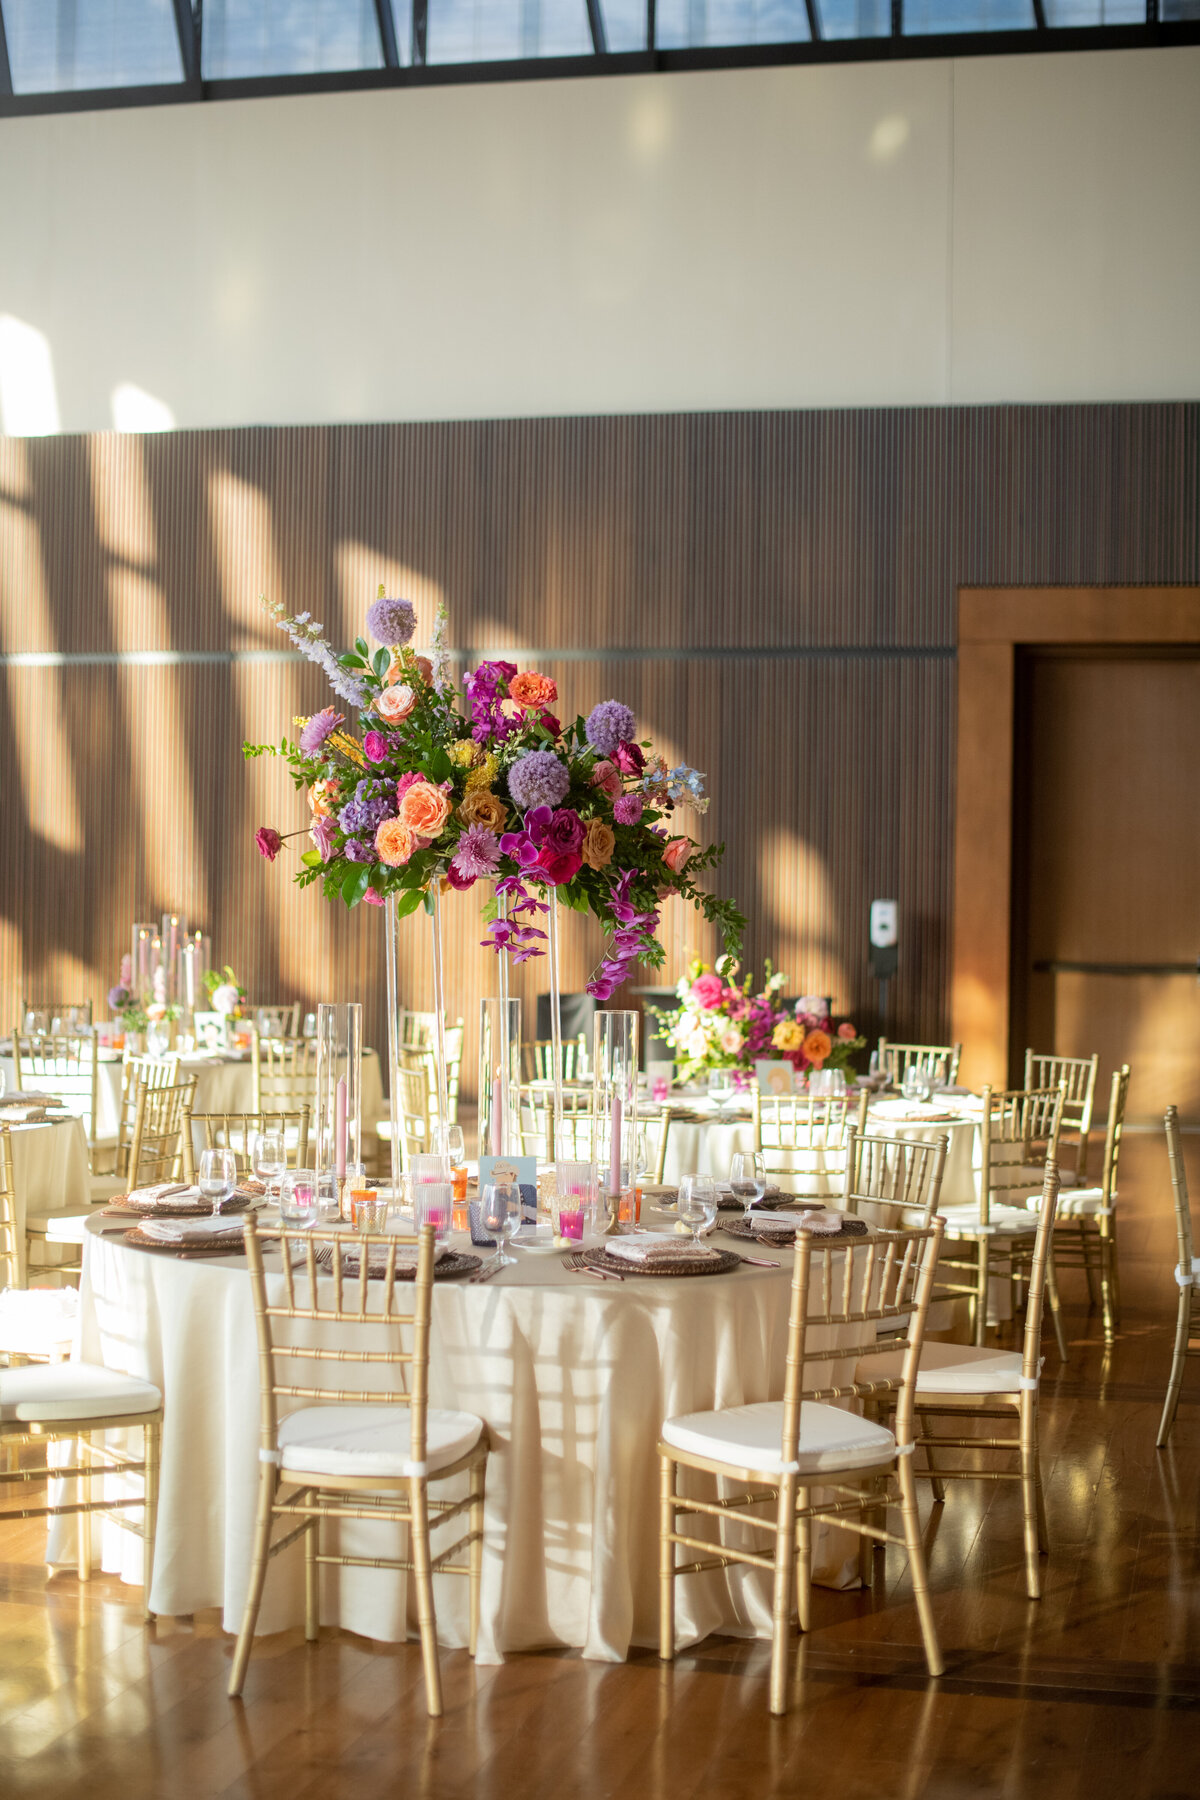 Lush elevated centerpieces in sunset hues of rosy pink, lavender, orange, and golden-yellow composed of phalaenopsis orchids, petal heavy roses, allium, delphinium, eremurus and natural greenery. Design by Rosemary and Finch in Nashville, TN.